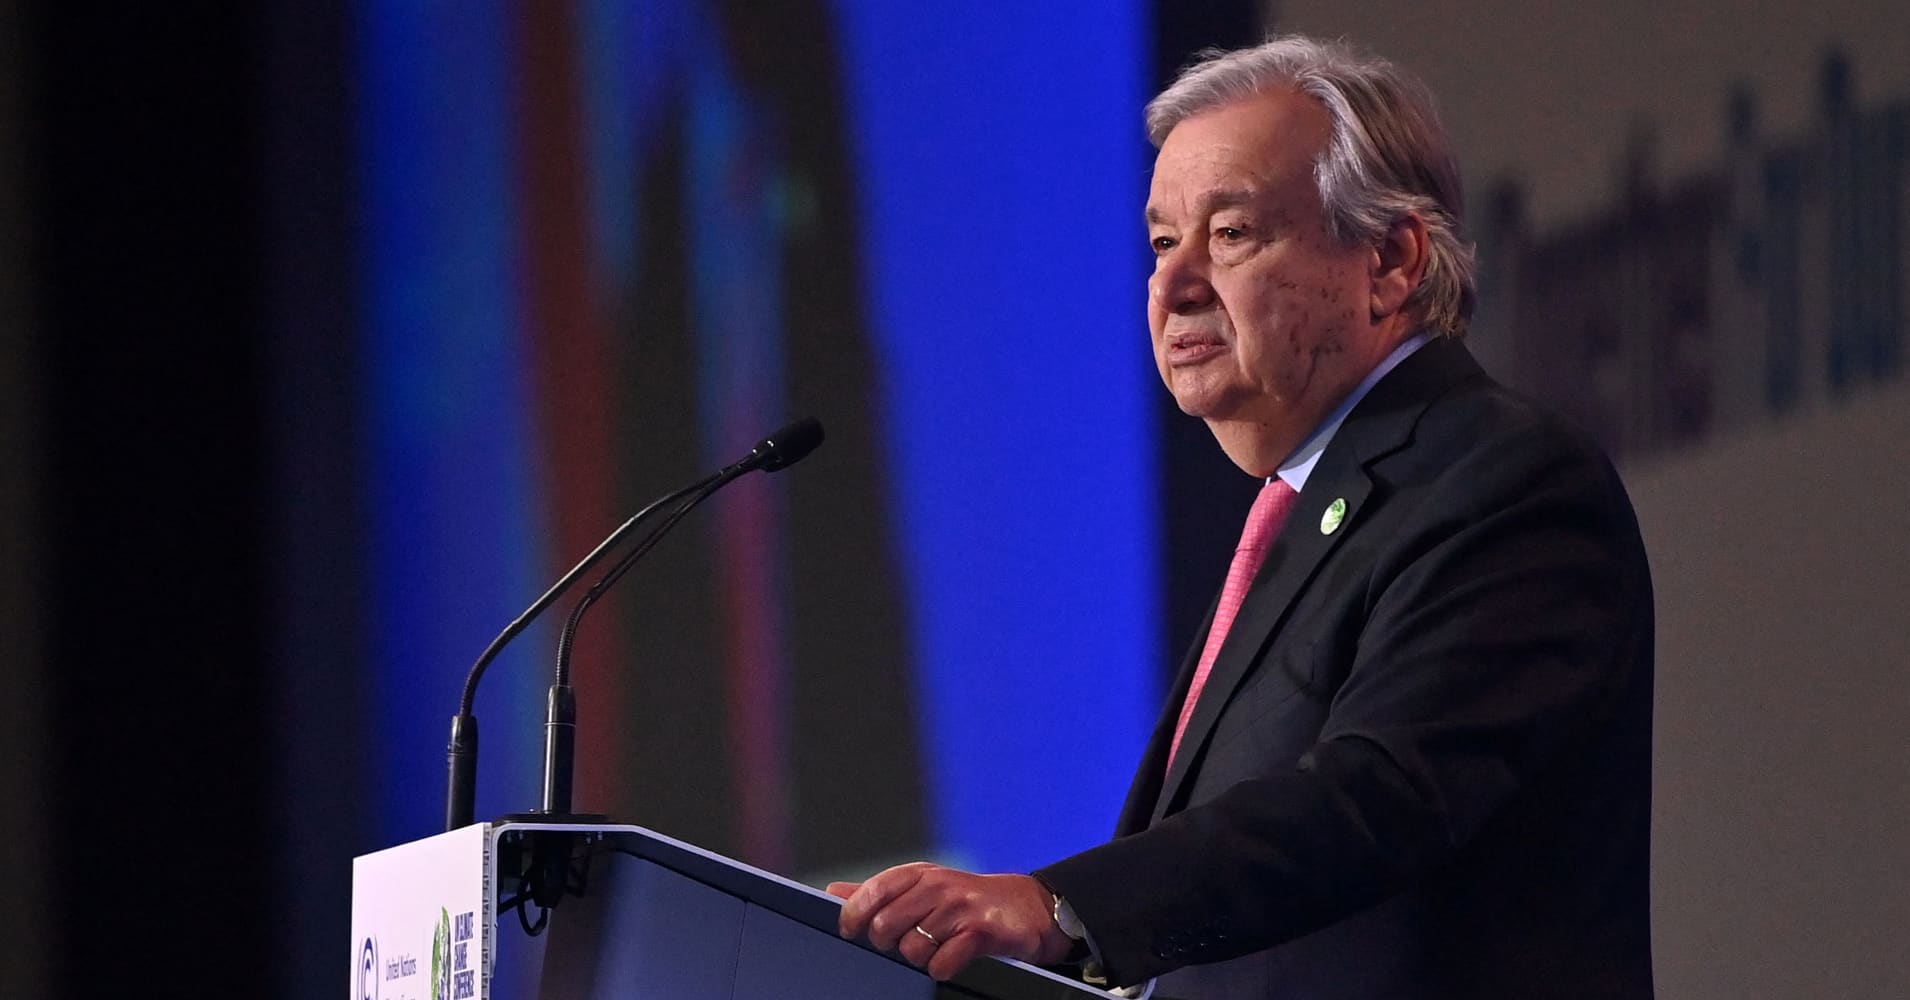 United Nations (UN) Secretary General Antonio Guterres speaks during the opening ceremony of the COP26 UN Climate Change Conference in Glasgow, Scotland on November 1, 2021.